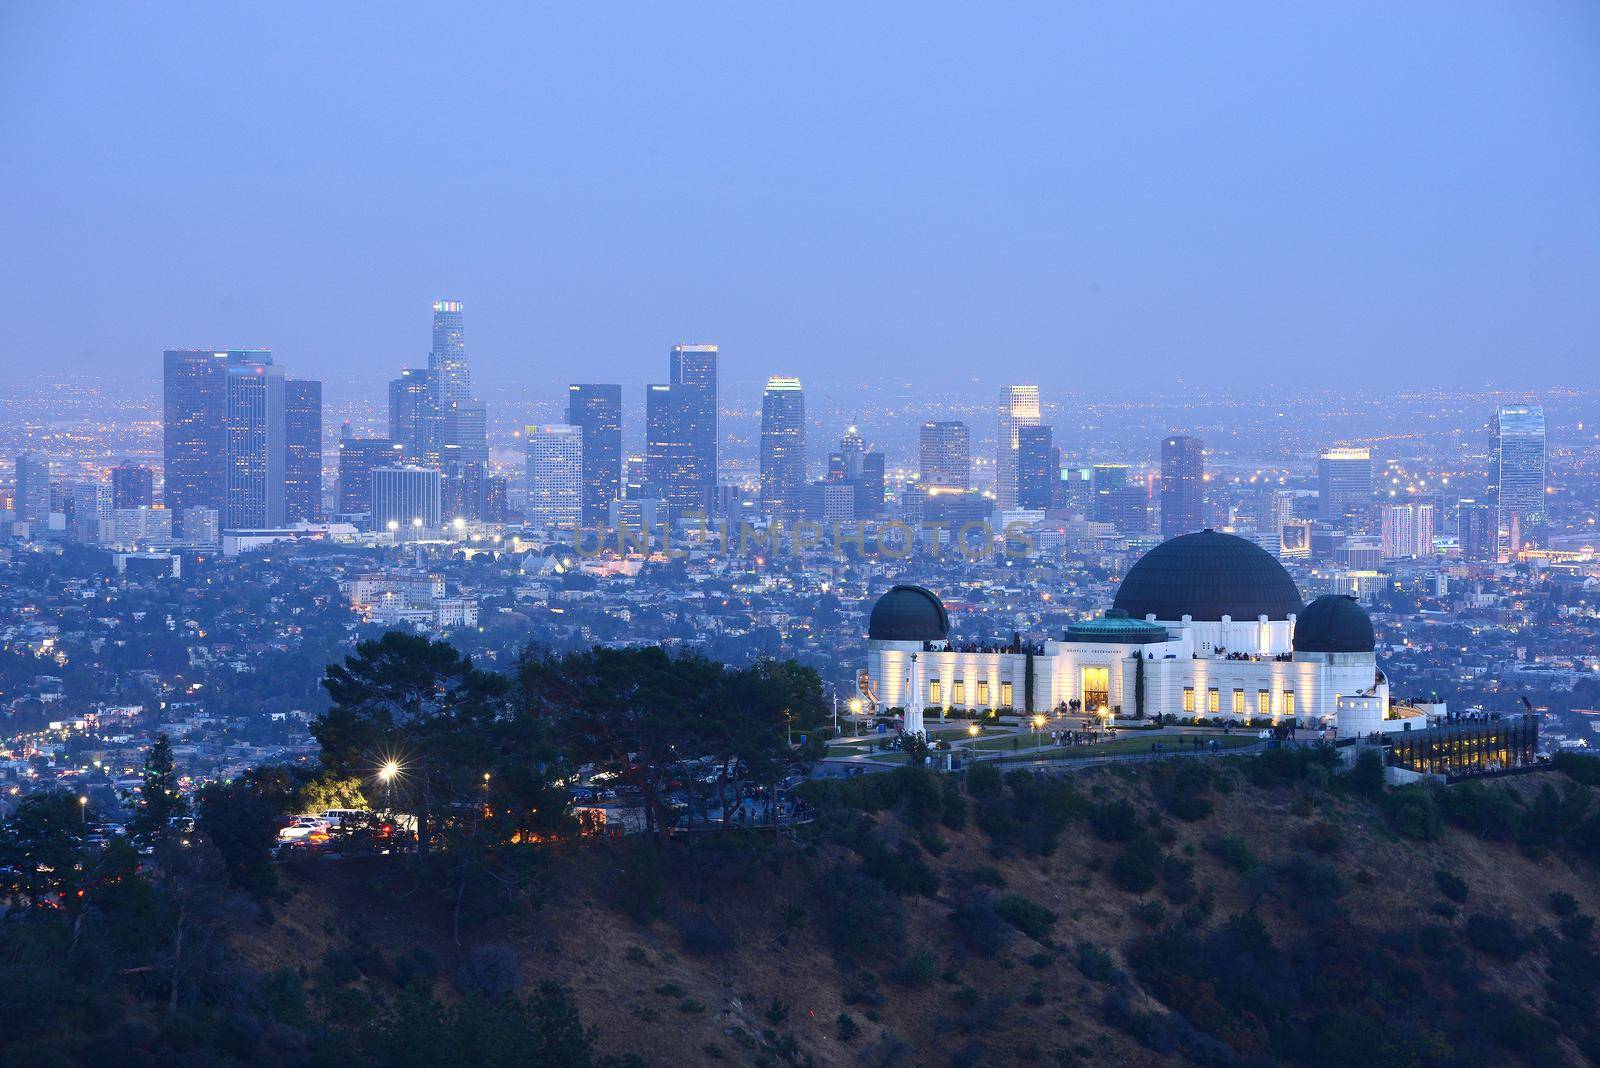 Griffith observatory by porbital